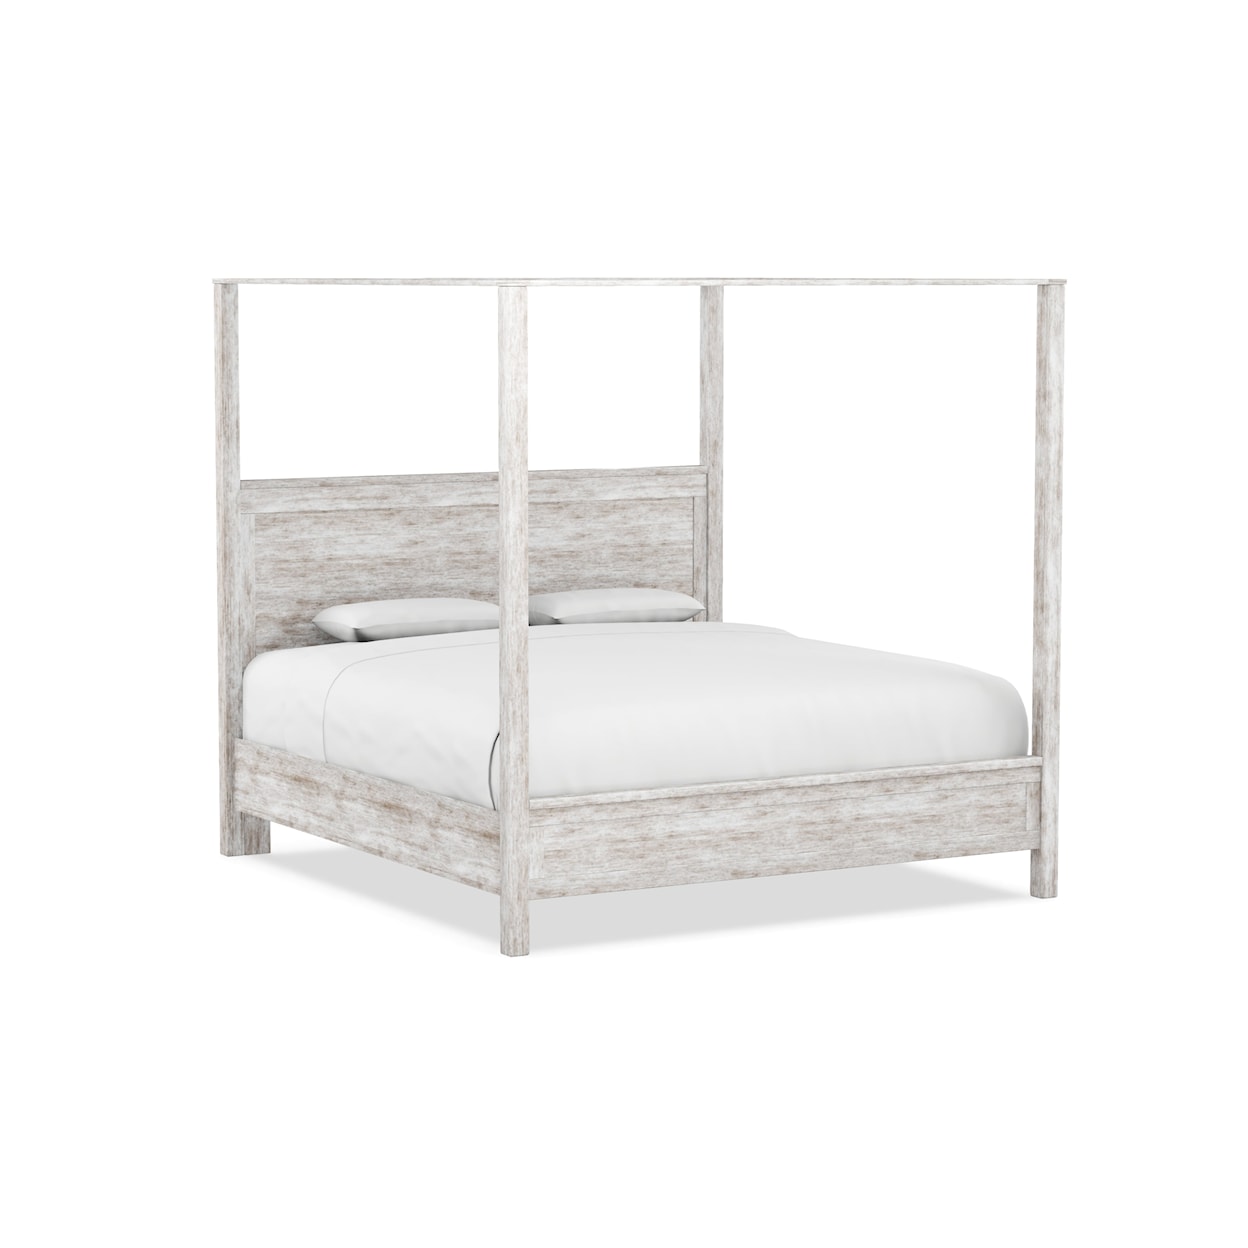 Durham Studio 19 King Poster Bed with Canopy